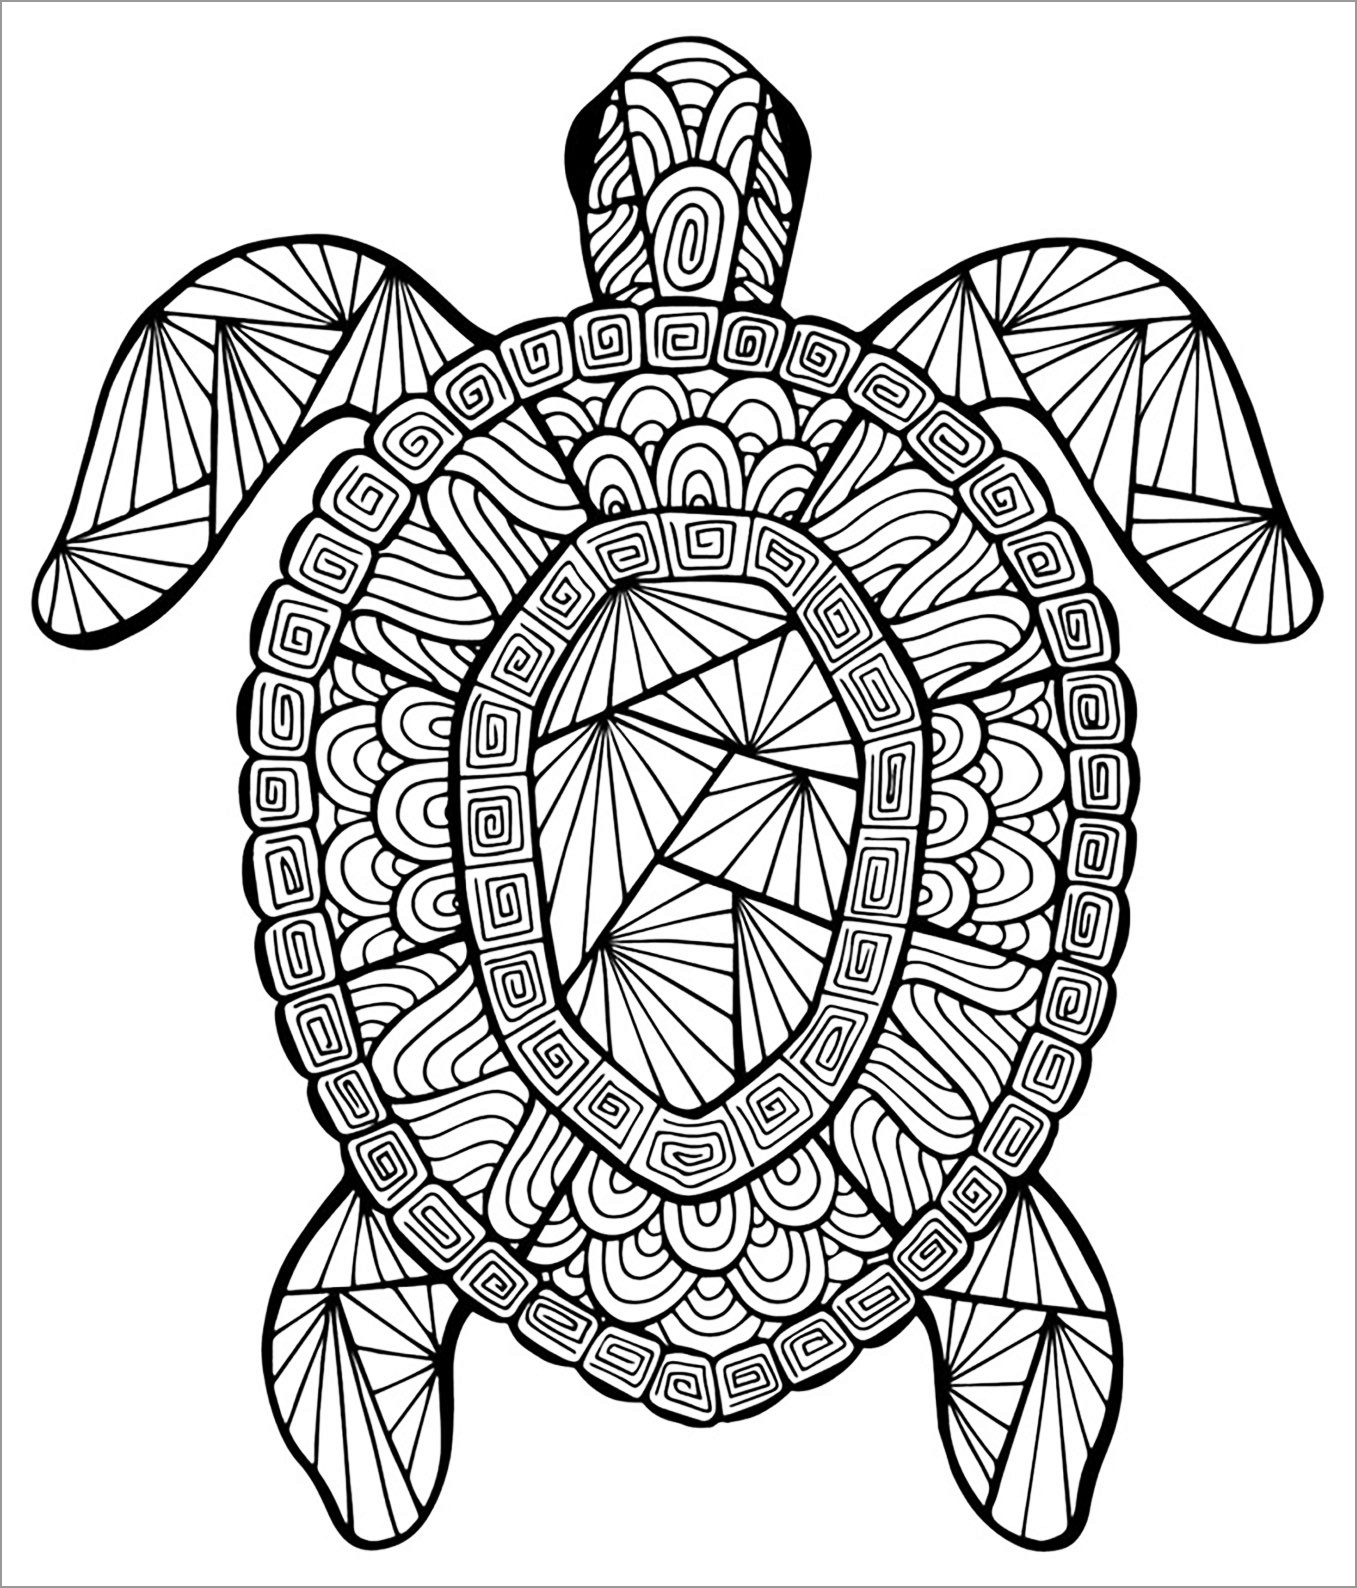 Zentangle tortoise Coloring Page to Print